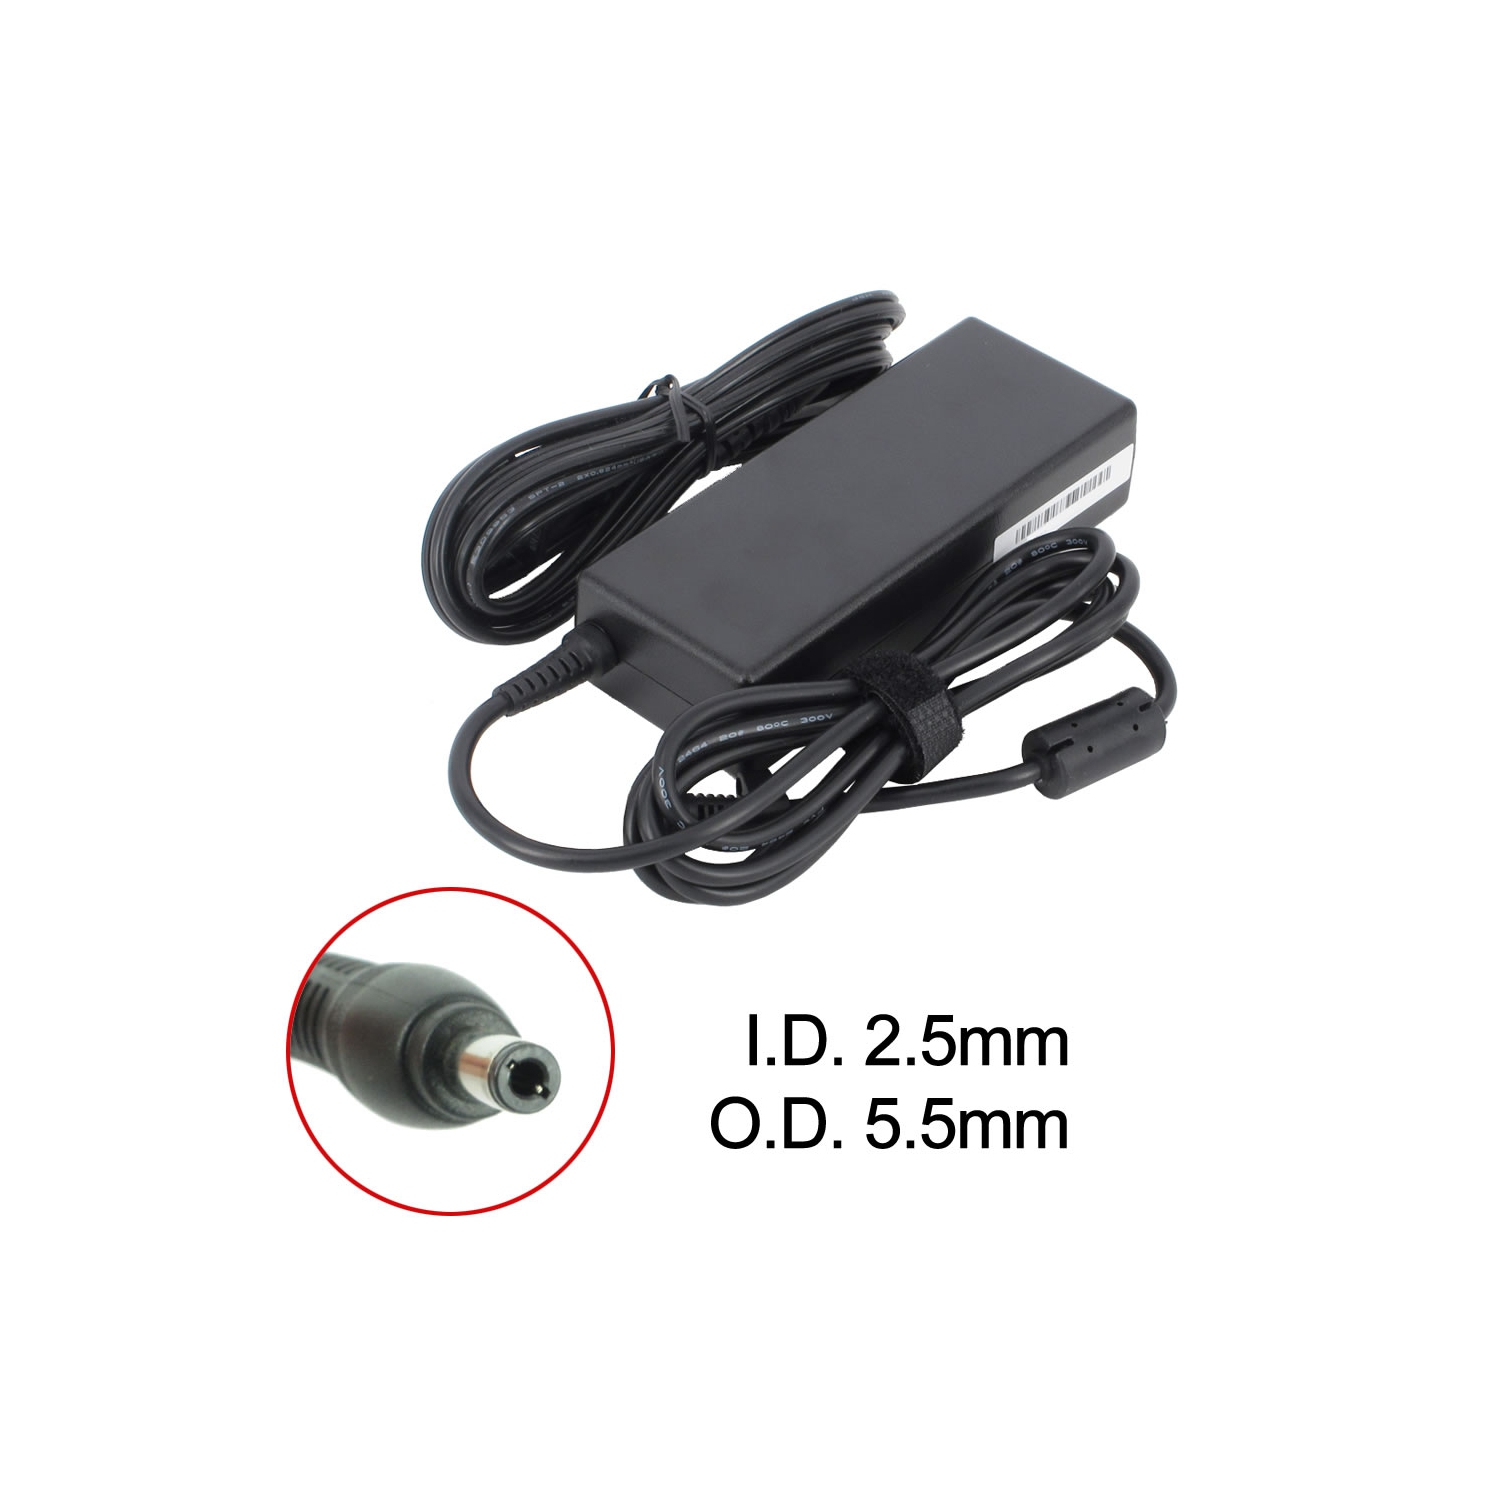 New Laptop AC Adapter for Fujitsu Pro Amilo V3525, 04G266010610, 6500693, 90-N6EPW2012, ADP-90CDDB, PA-1900-24, PPP014S